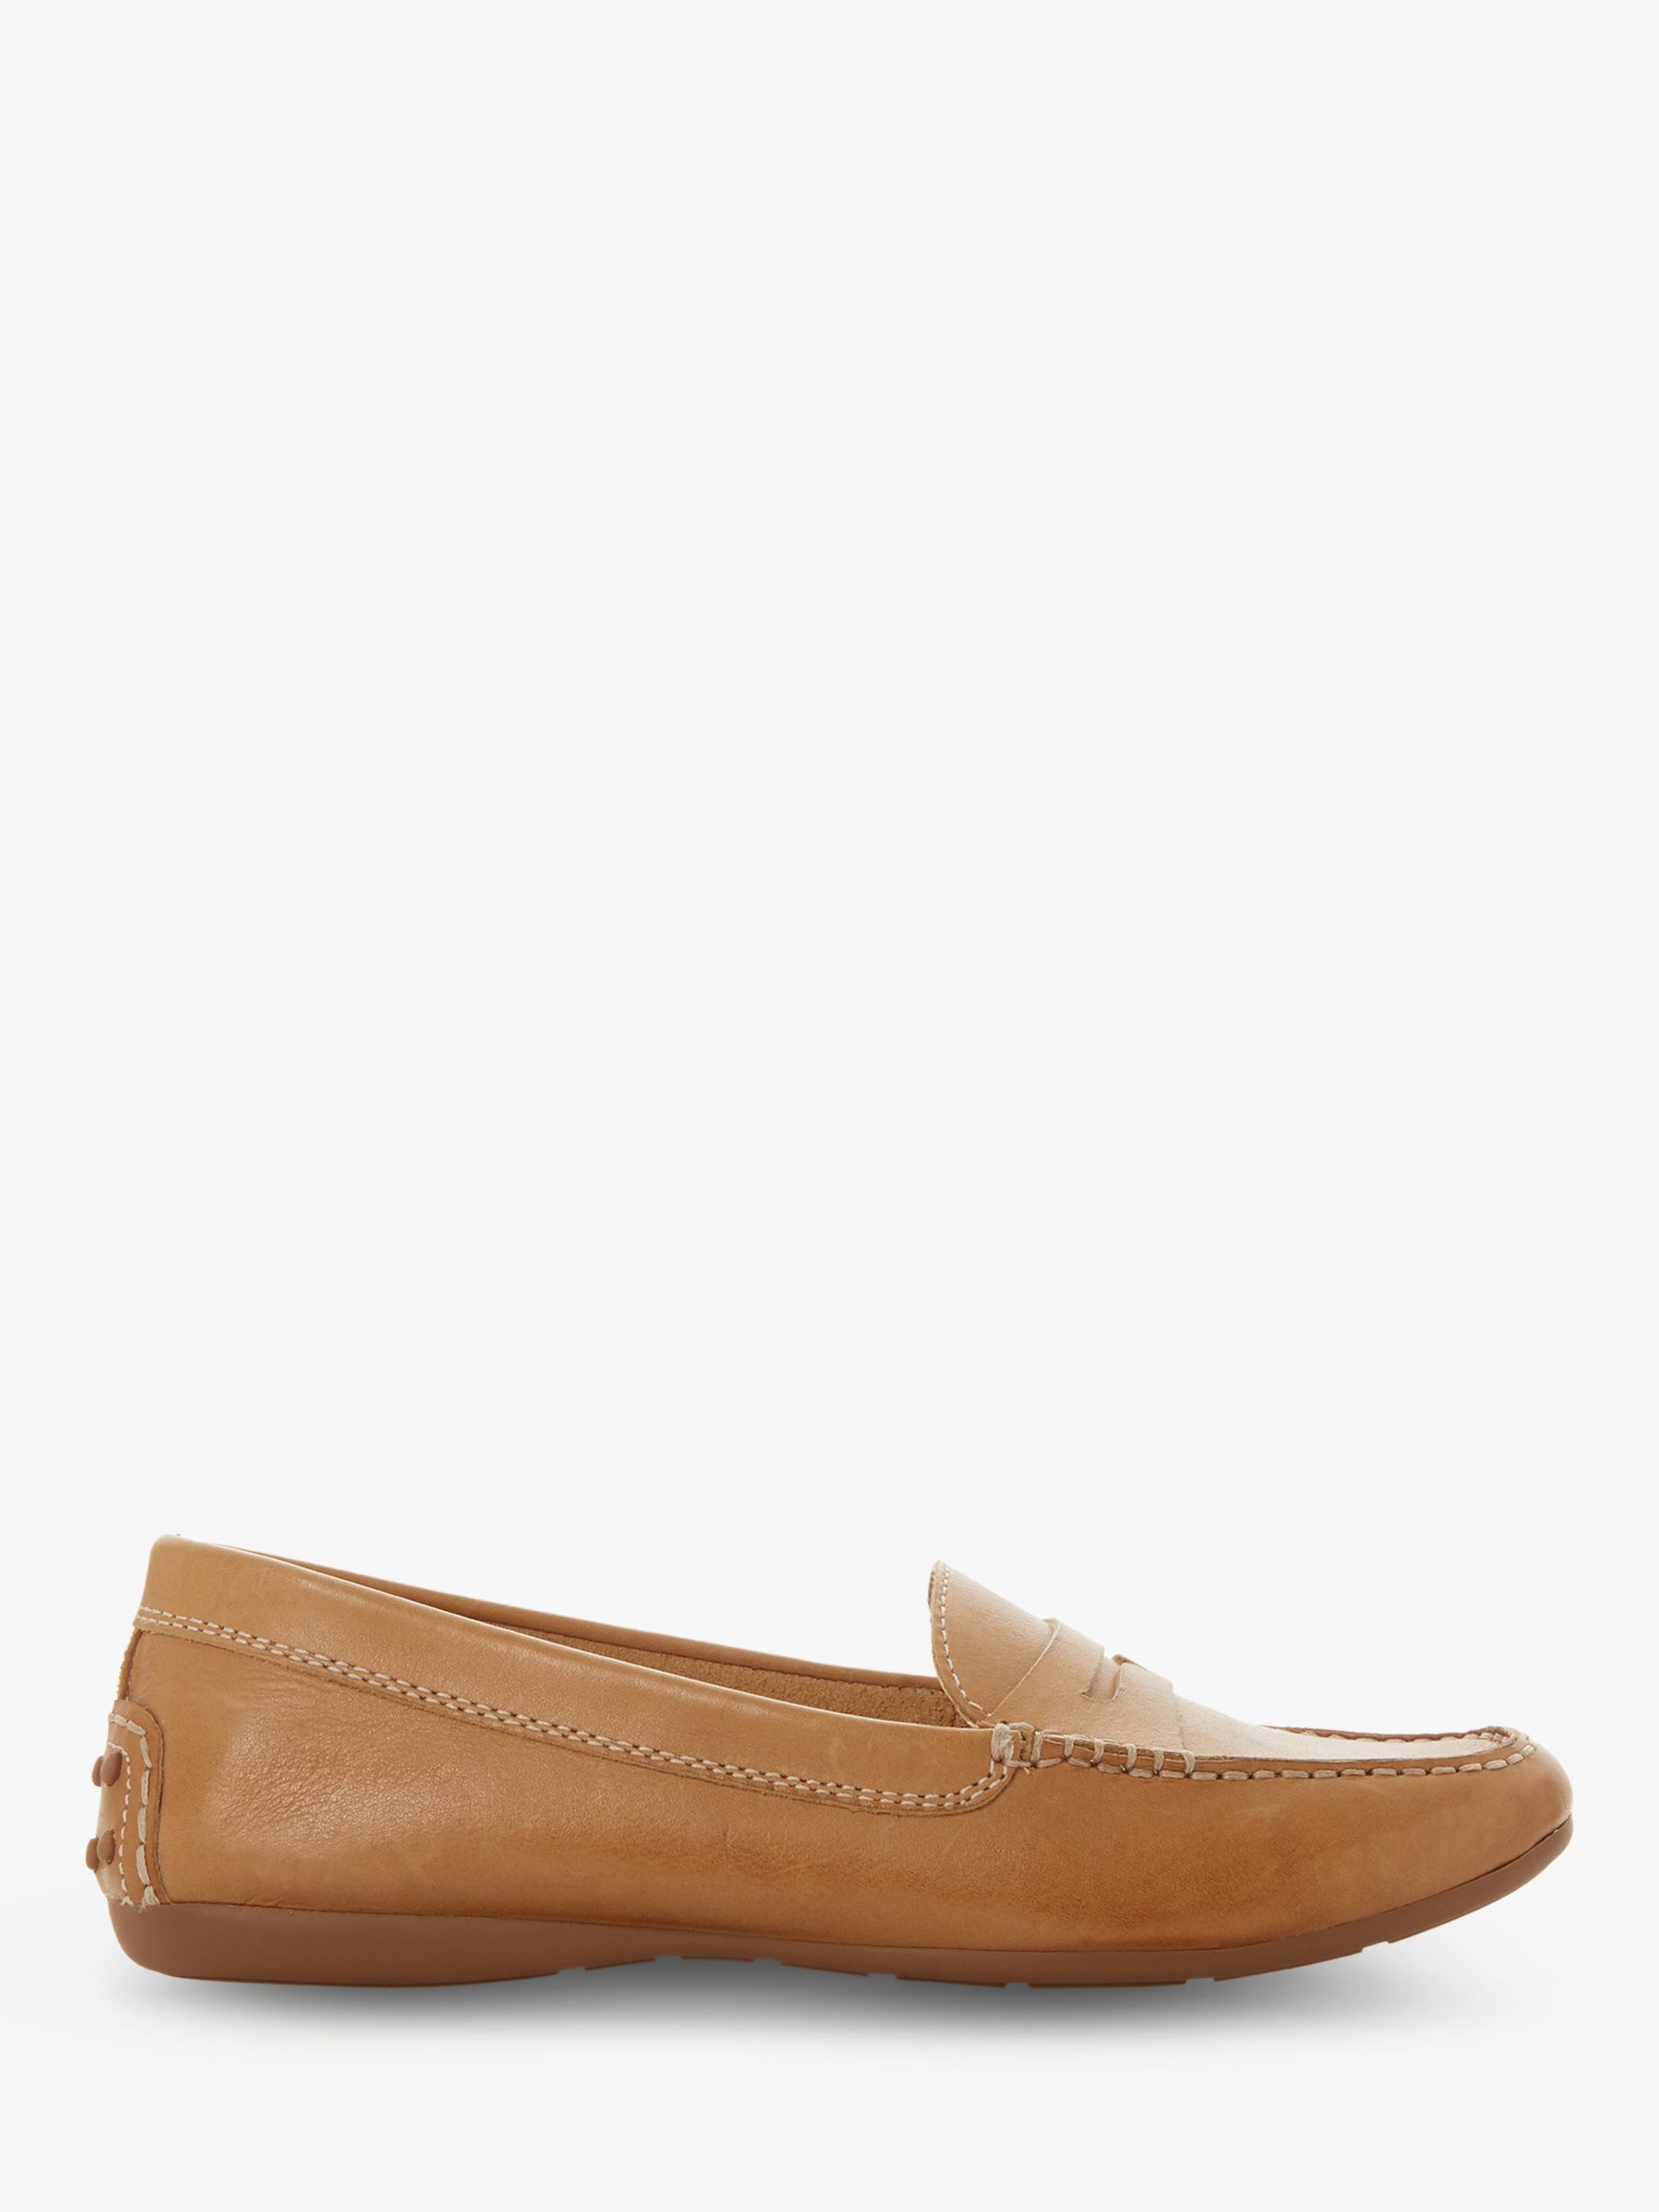 Dune Grover Loafers